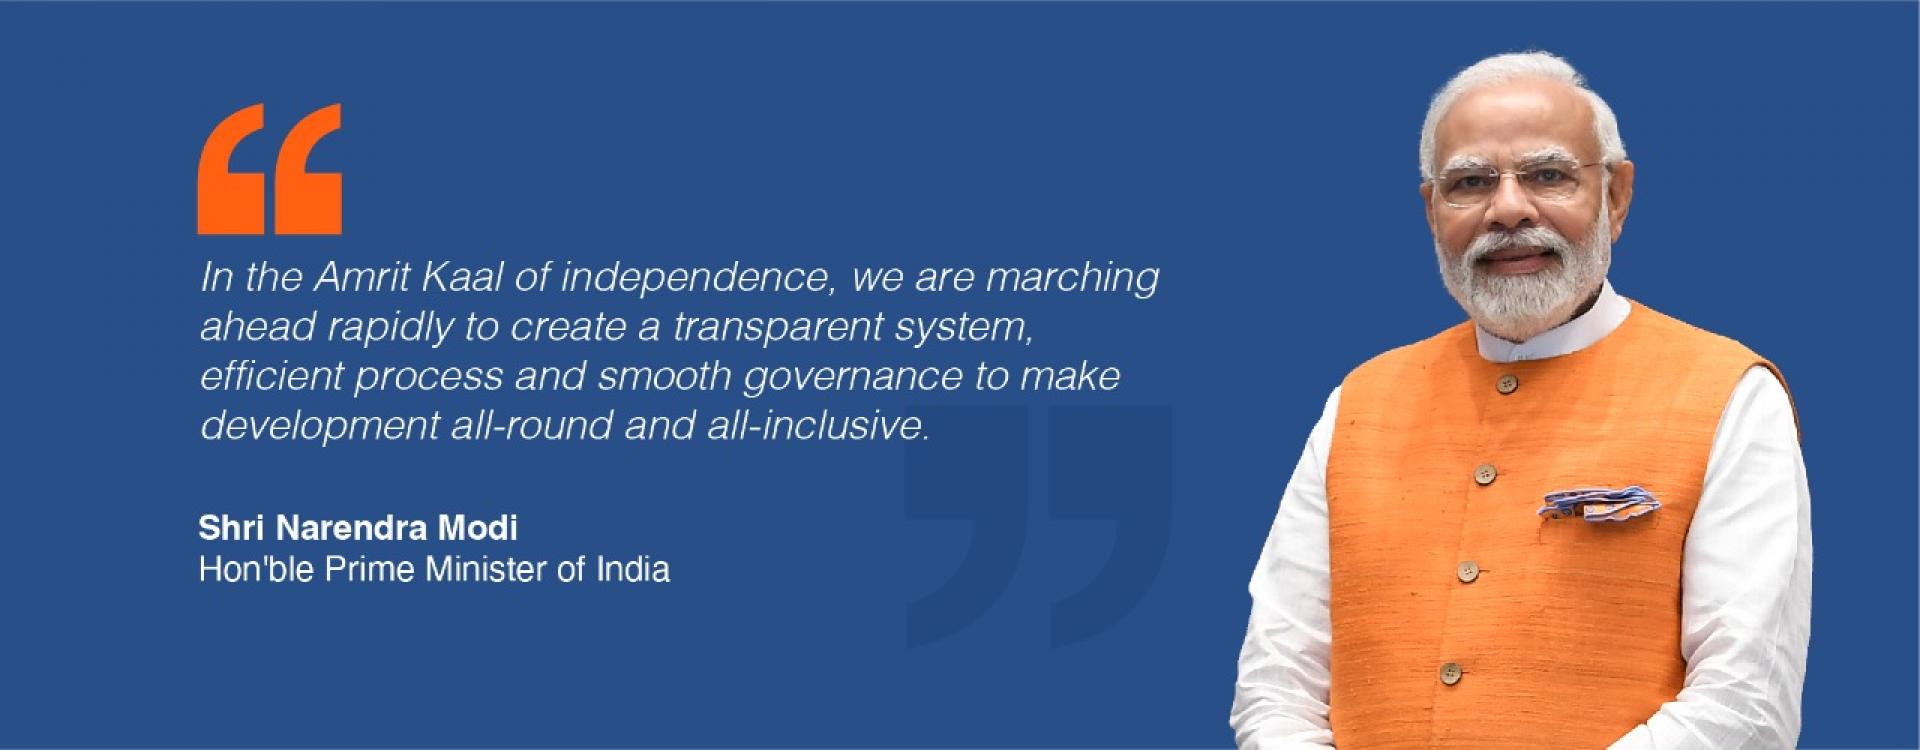 In the Amrit Kaal of independence, we are marching ahead rapidly to create a transparent system, efficient process and smooth governance to make development all-round and all-inclusive.